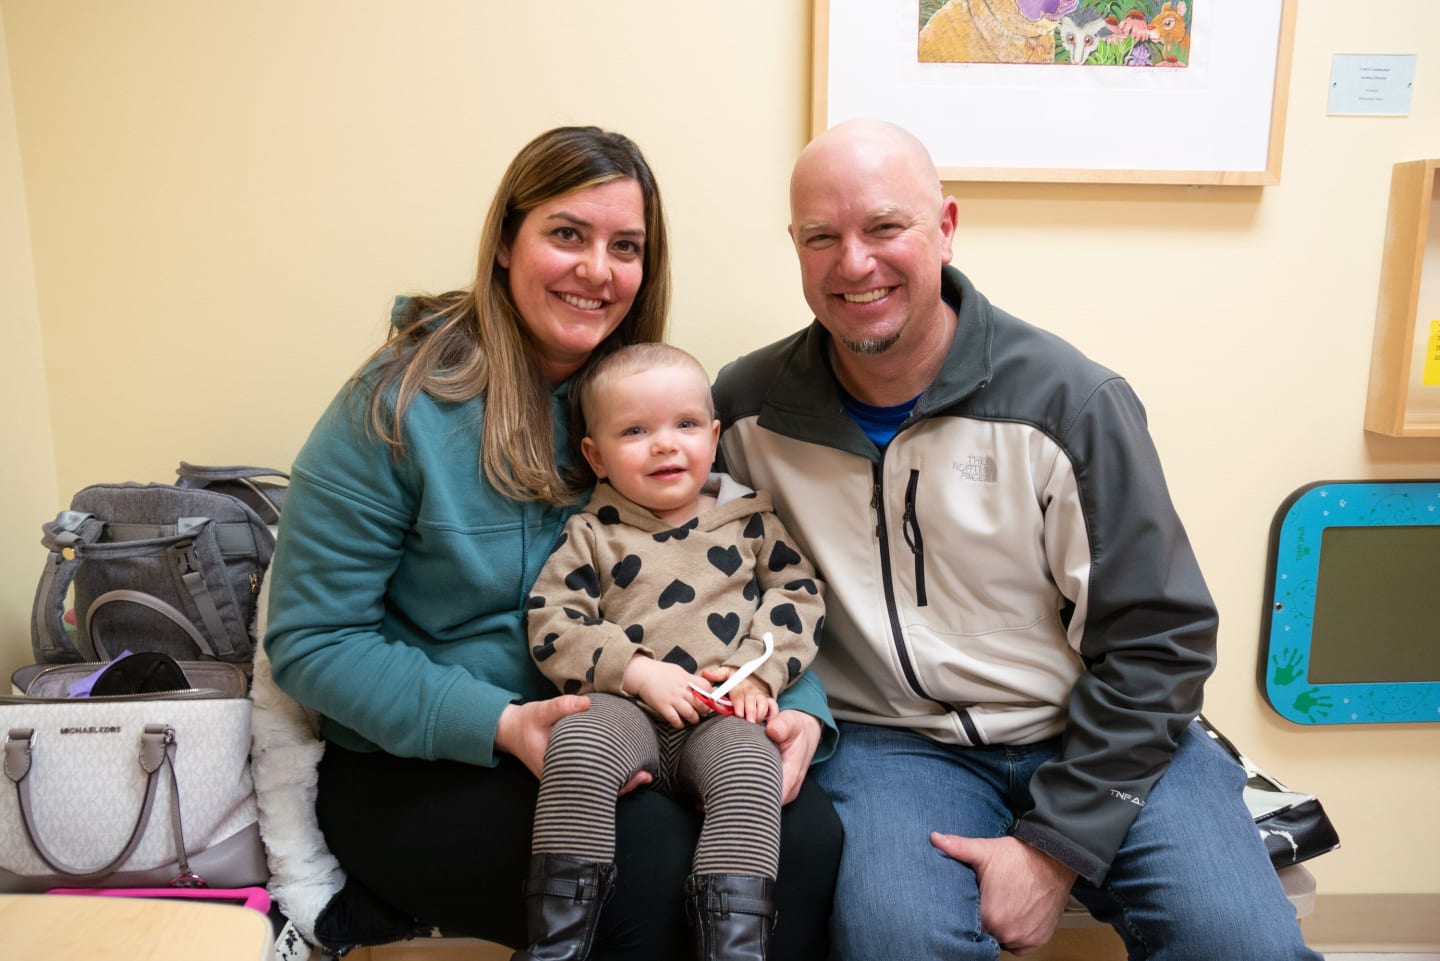 Kinsley Judd sitting with her parents, Sarah and Ryan, inside a hospital room